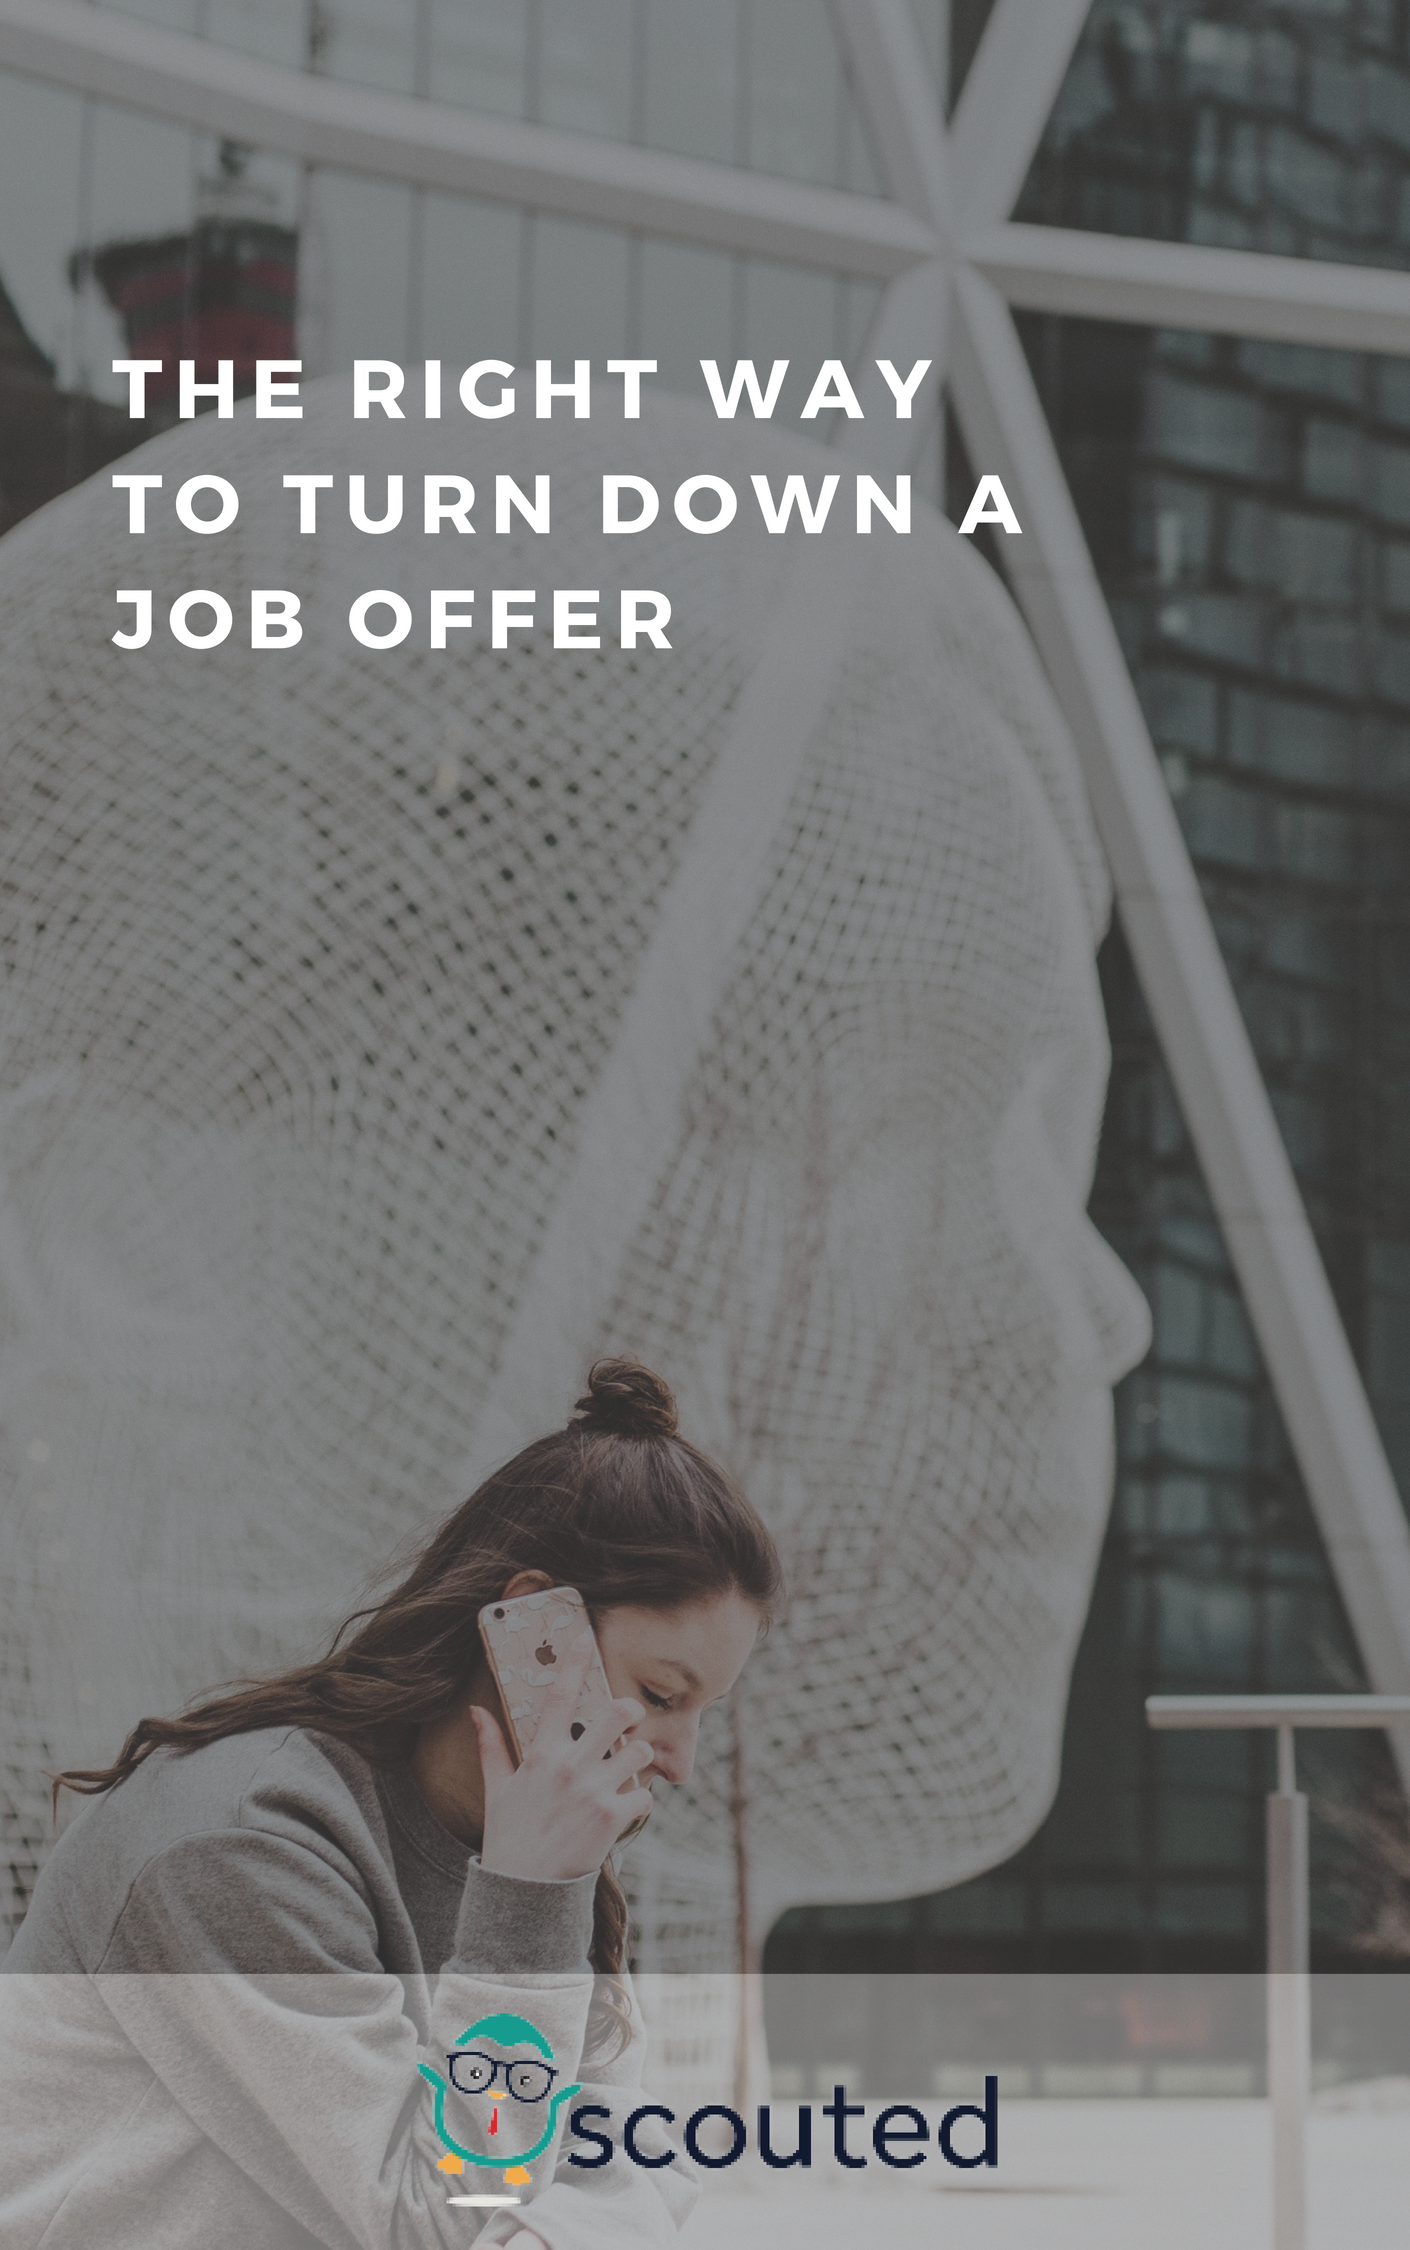 Ok so not all jobs are what you might have hoped them to be and that’s ok! There’s more fish in the sea. So what do you do when it’s time to turn down a job offer?